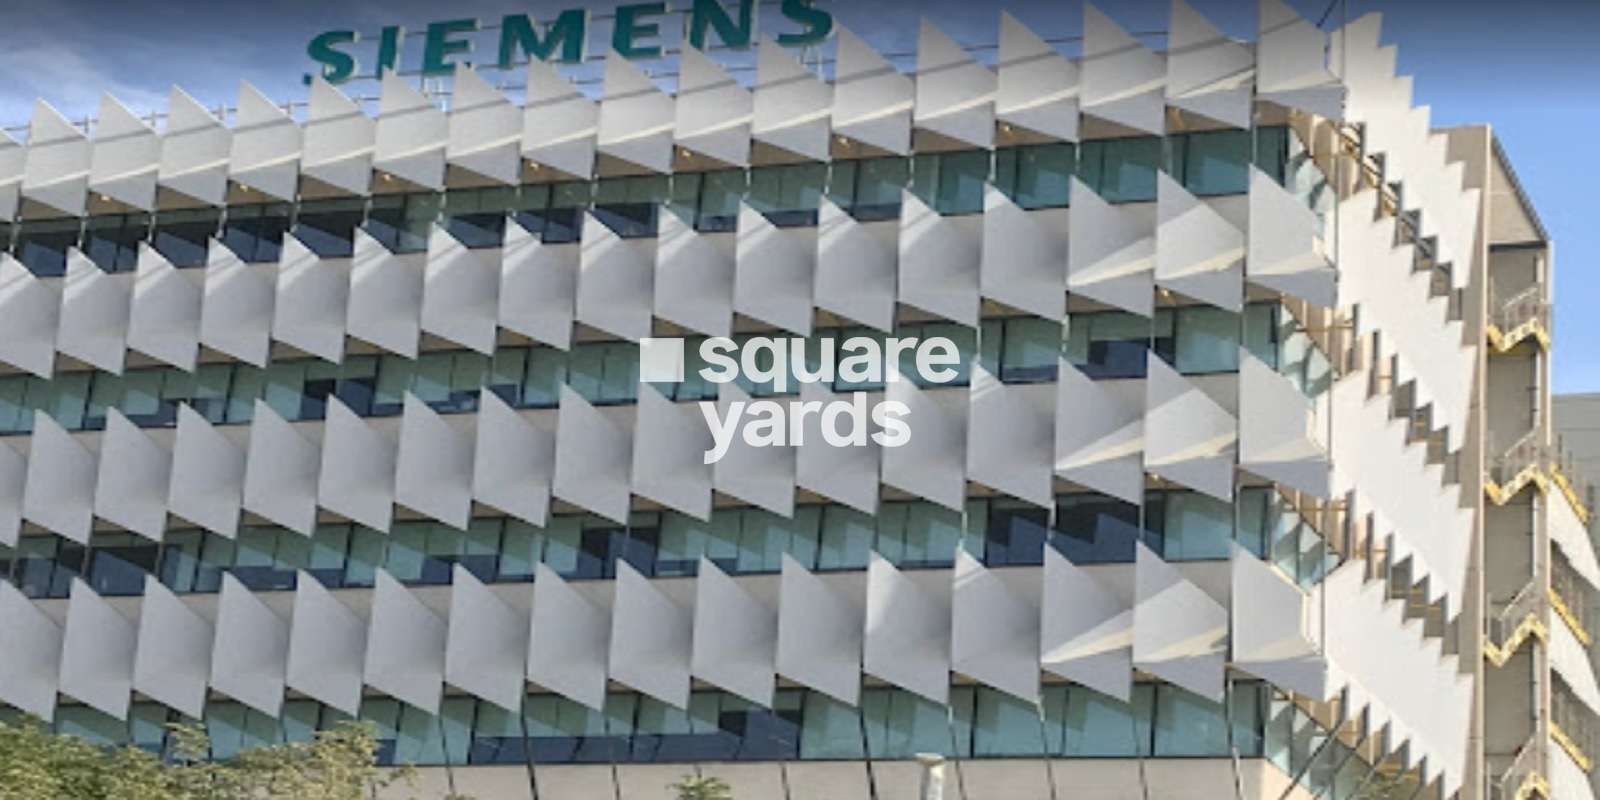 Siemens Building Cover Image